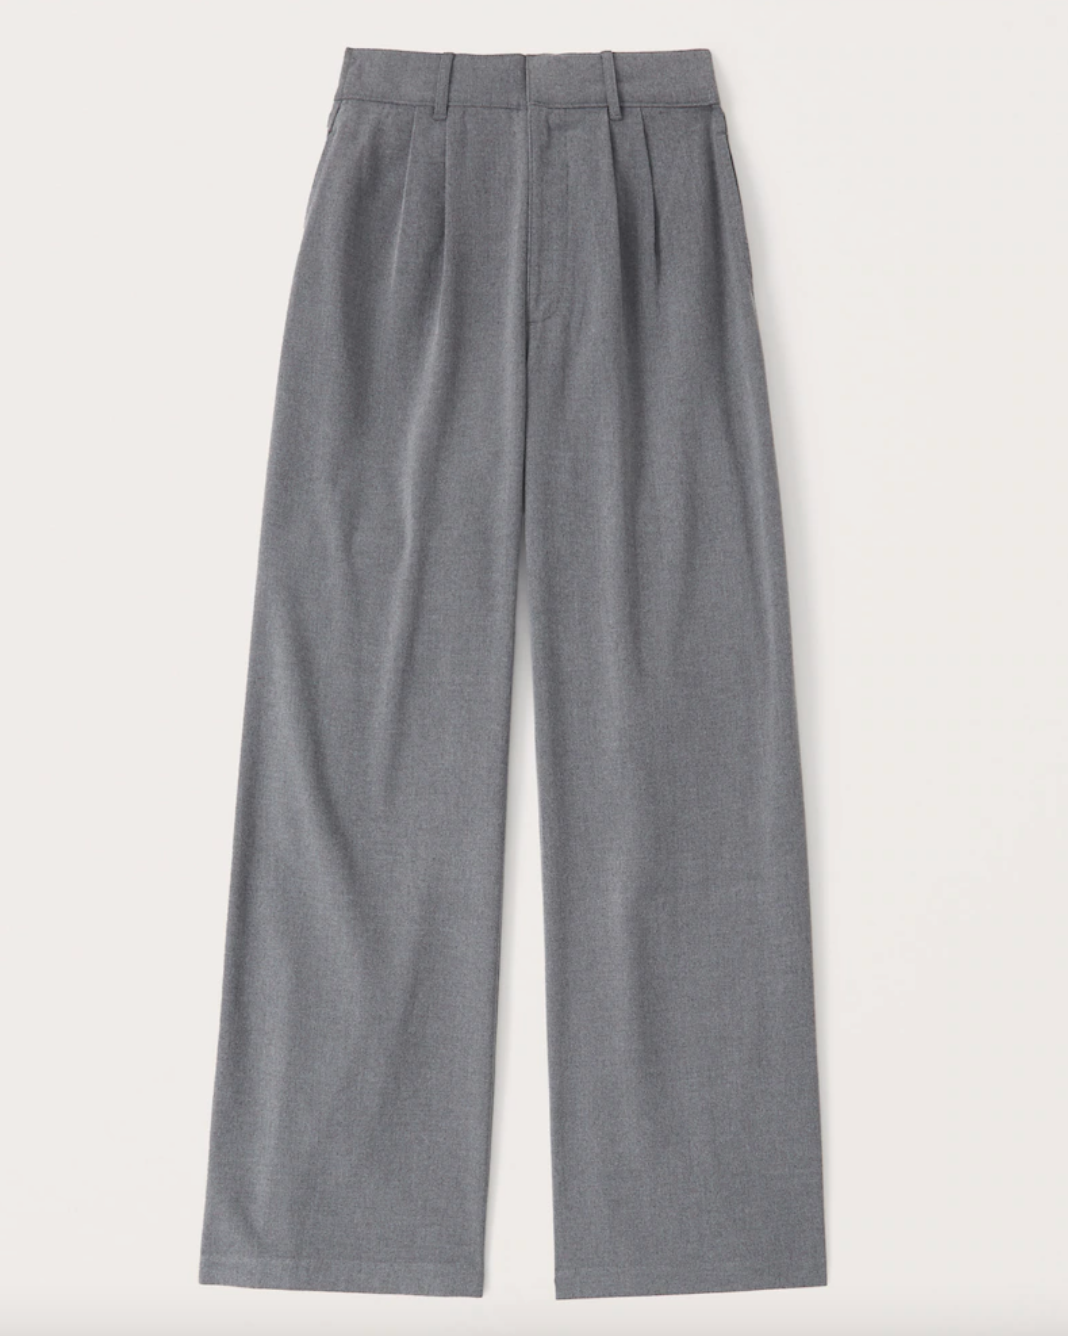 Abercrombie and Fitch + Tailored Wide Leg Pants